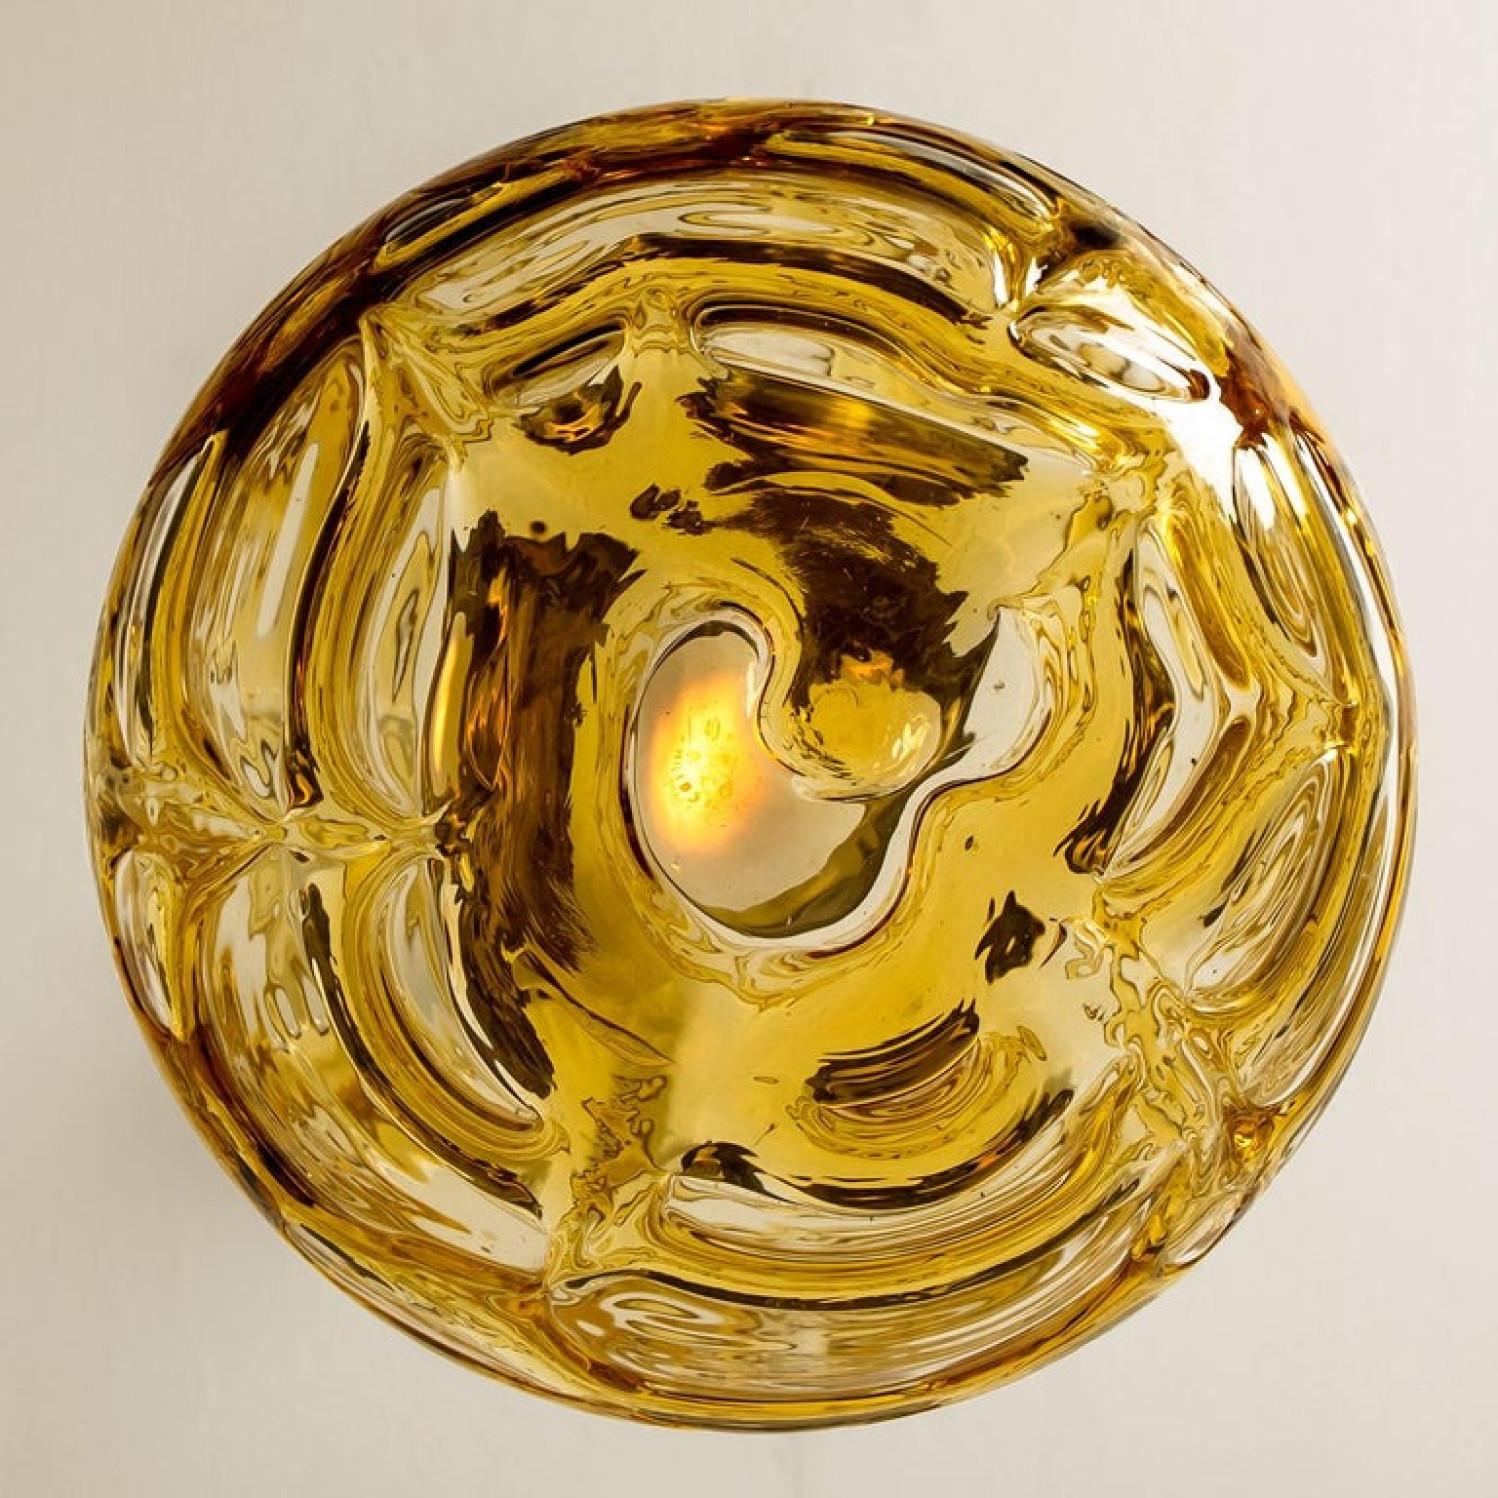 Exceptional Pair of Amber Murano Glass Pendant Lights Venini Style, 1970 For Sale 3